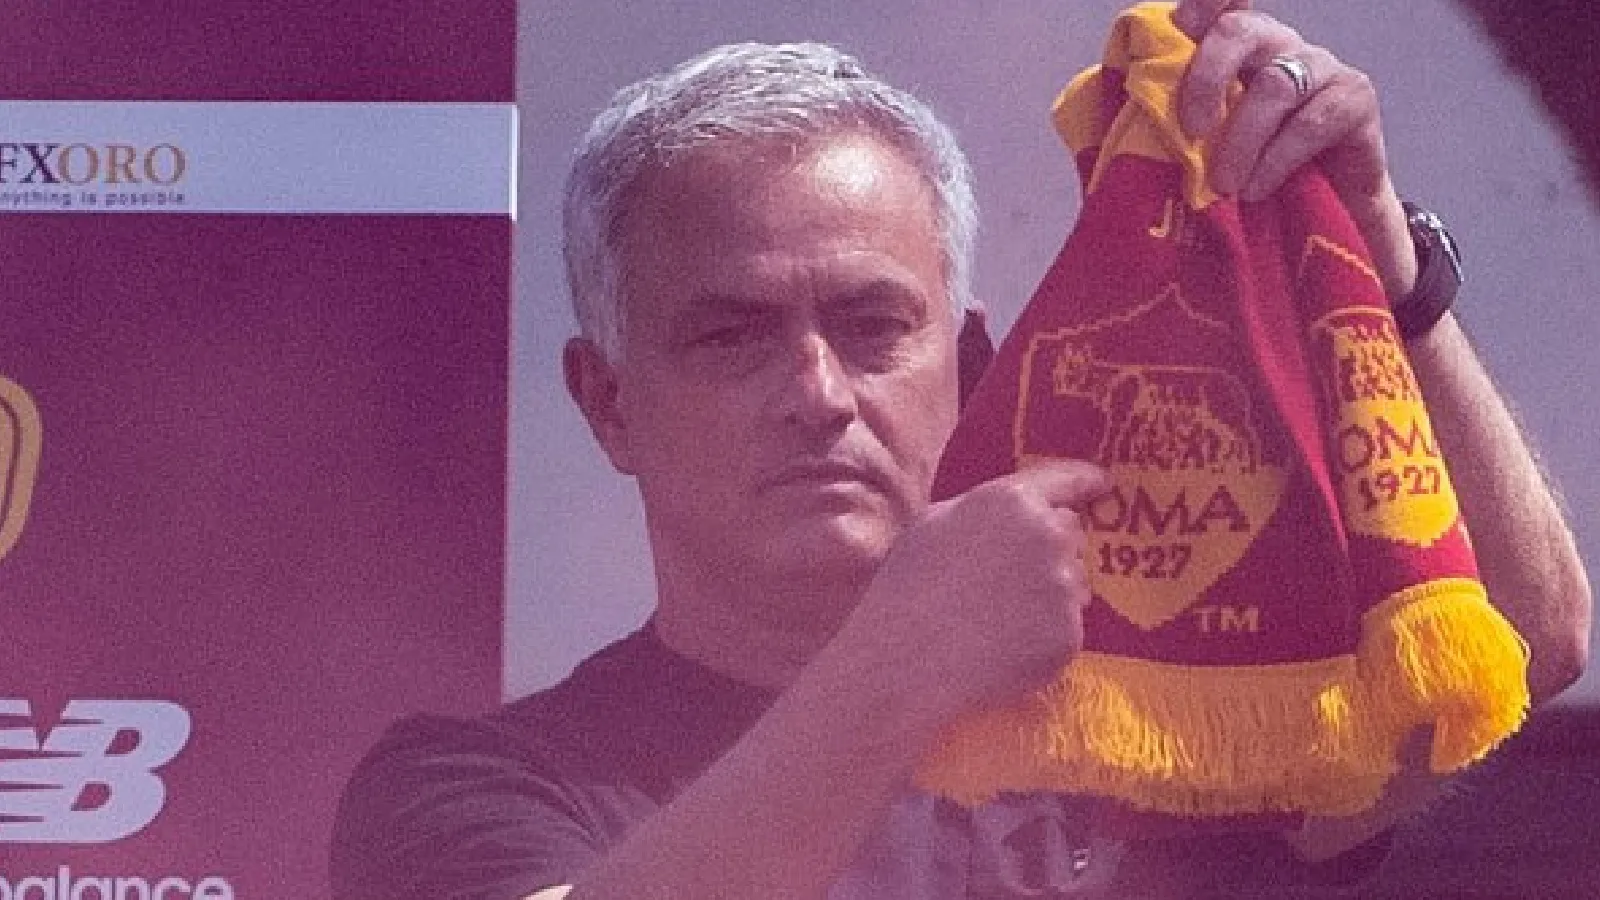 Jose Mourinho points at the AS Roma badge